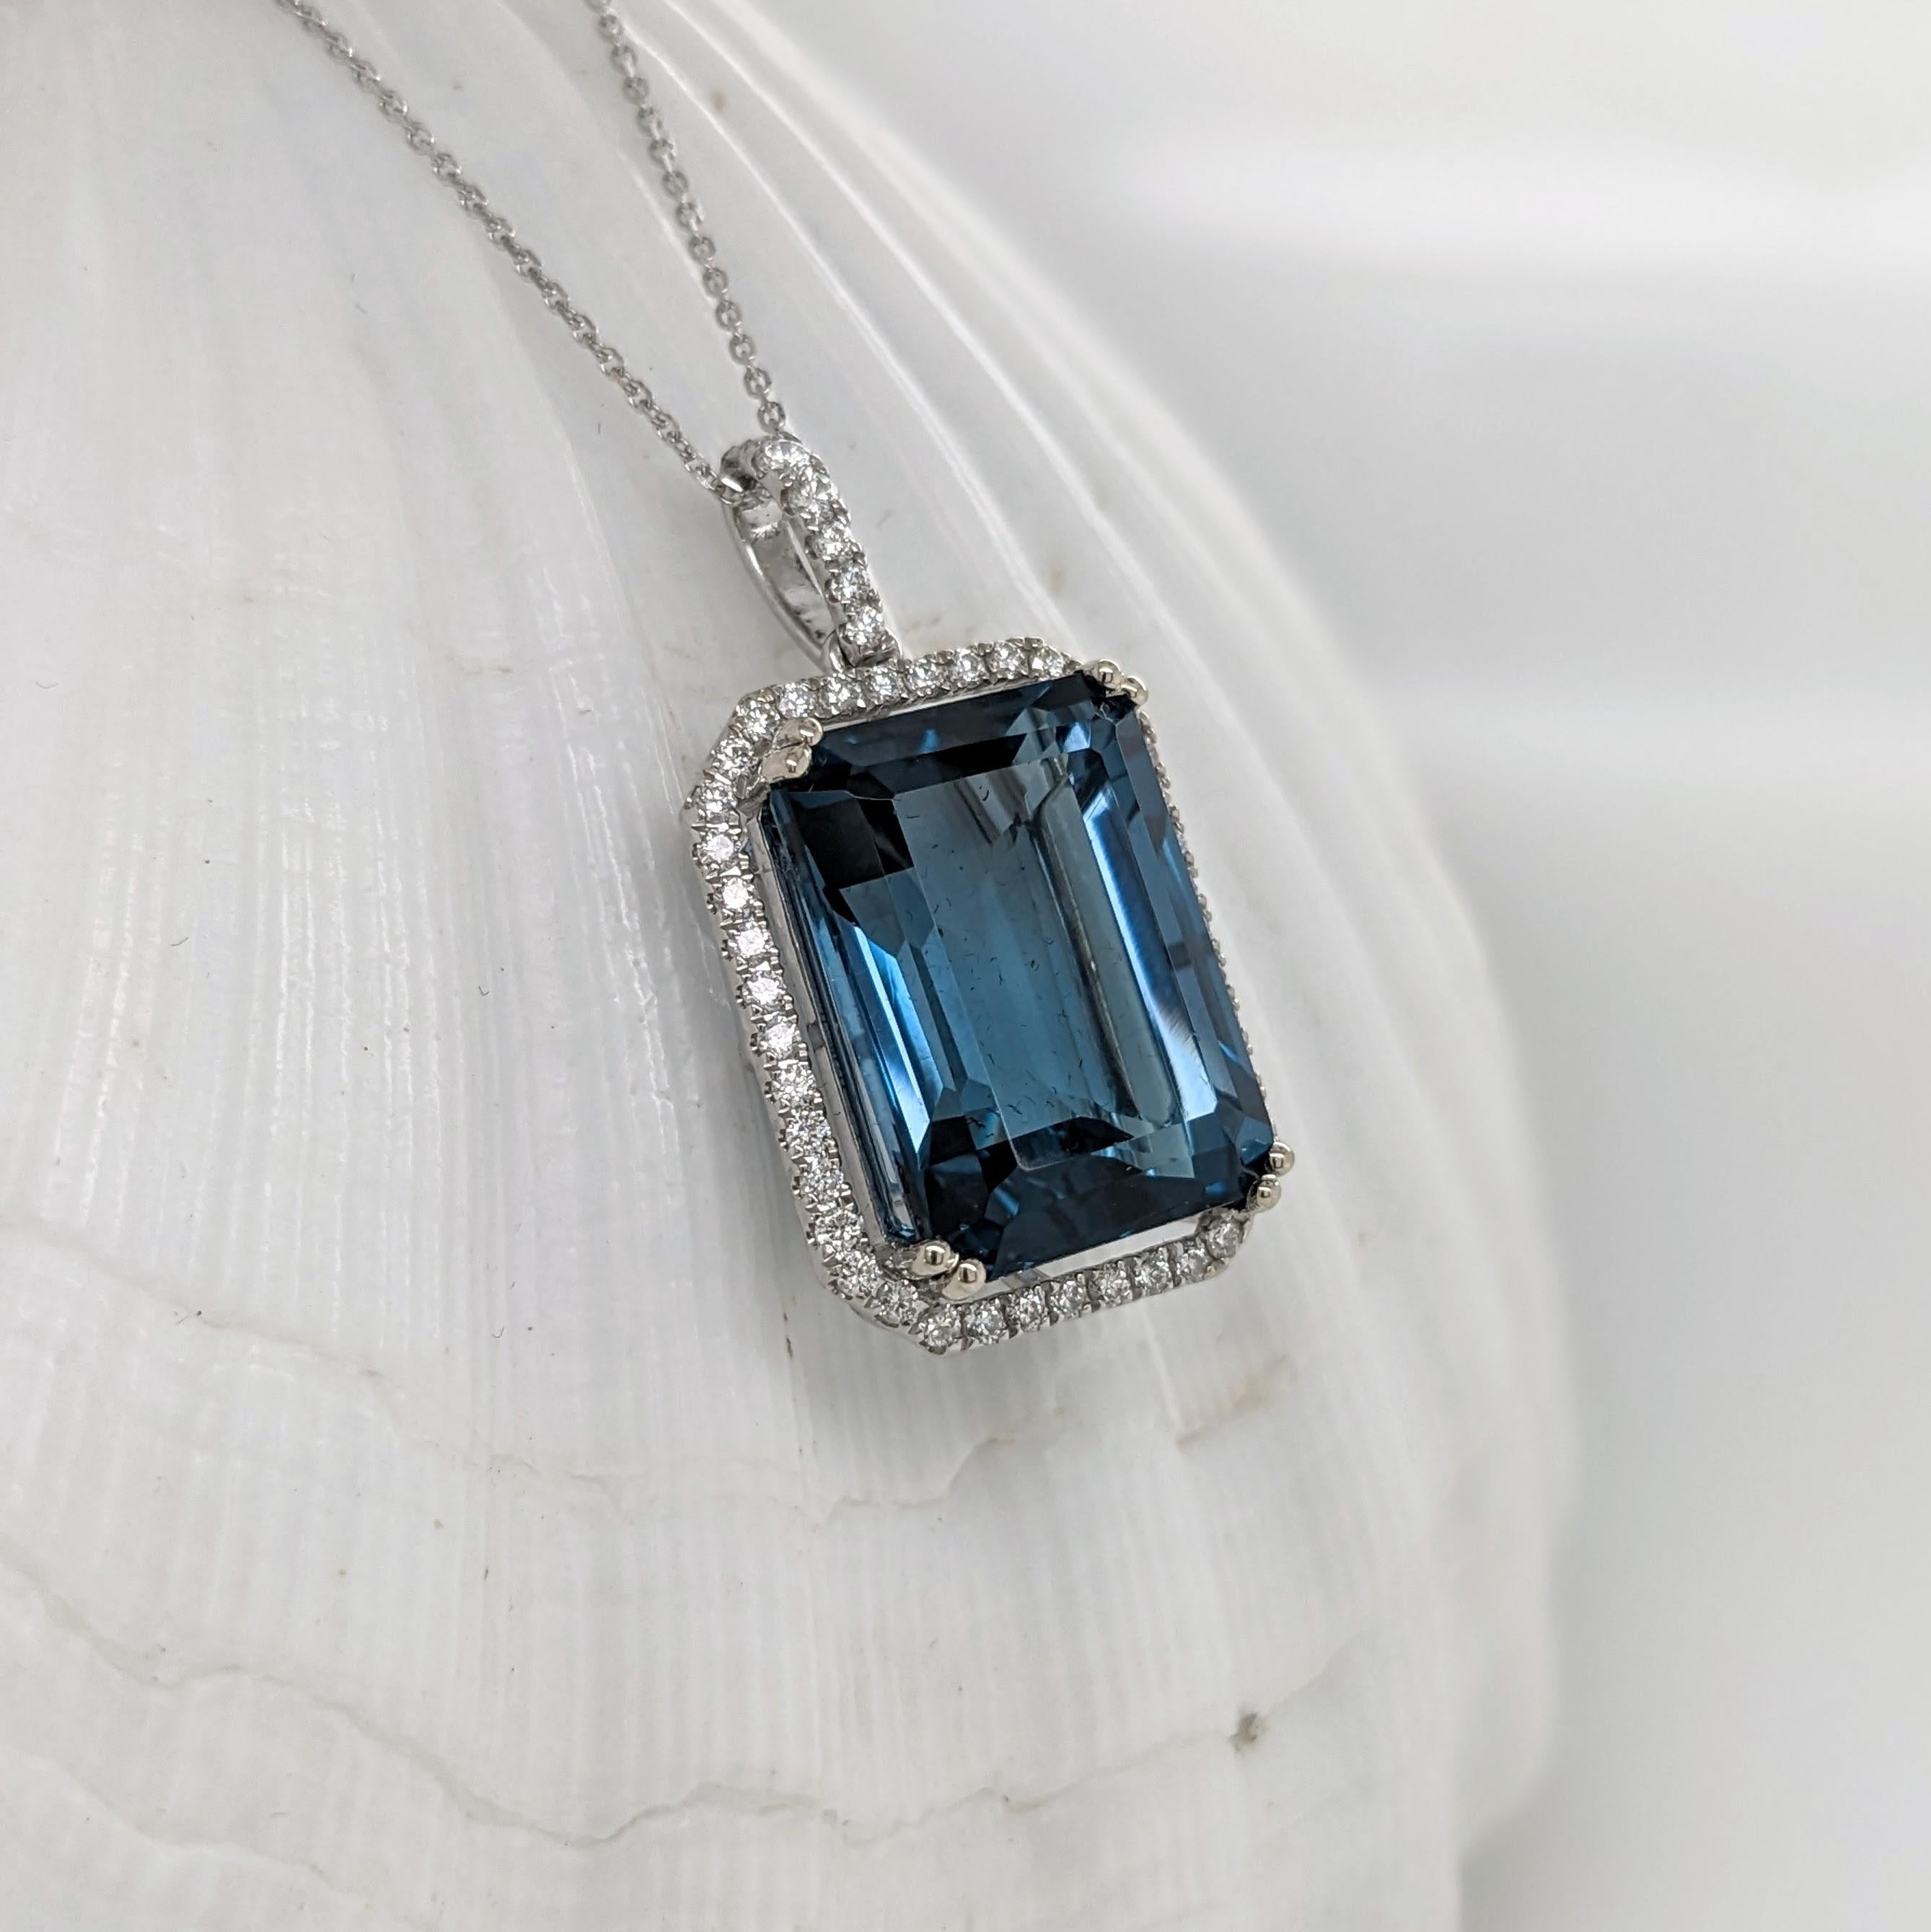 Modern 21ct London Topaz Pendant w Earth Mined Diamonds in Solid 14K Gold EM 18x13mm For Sale